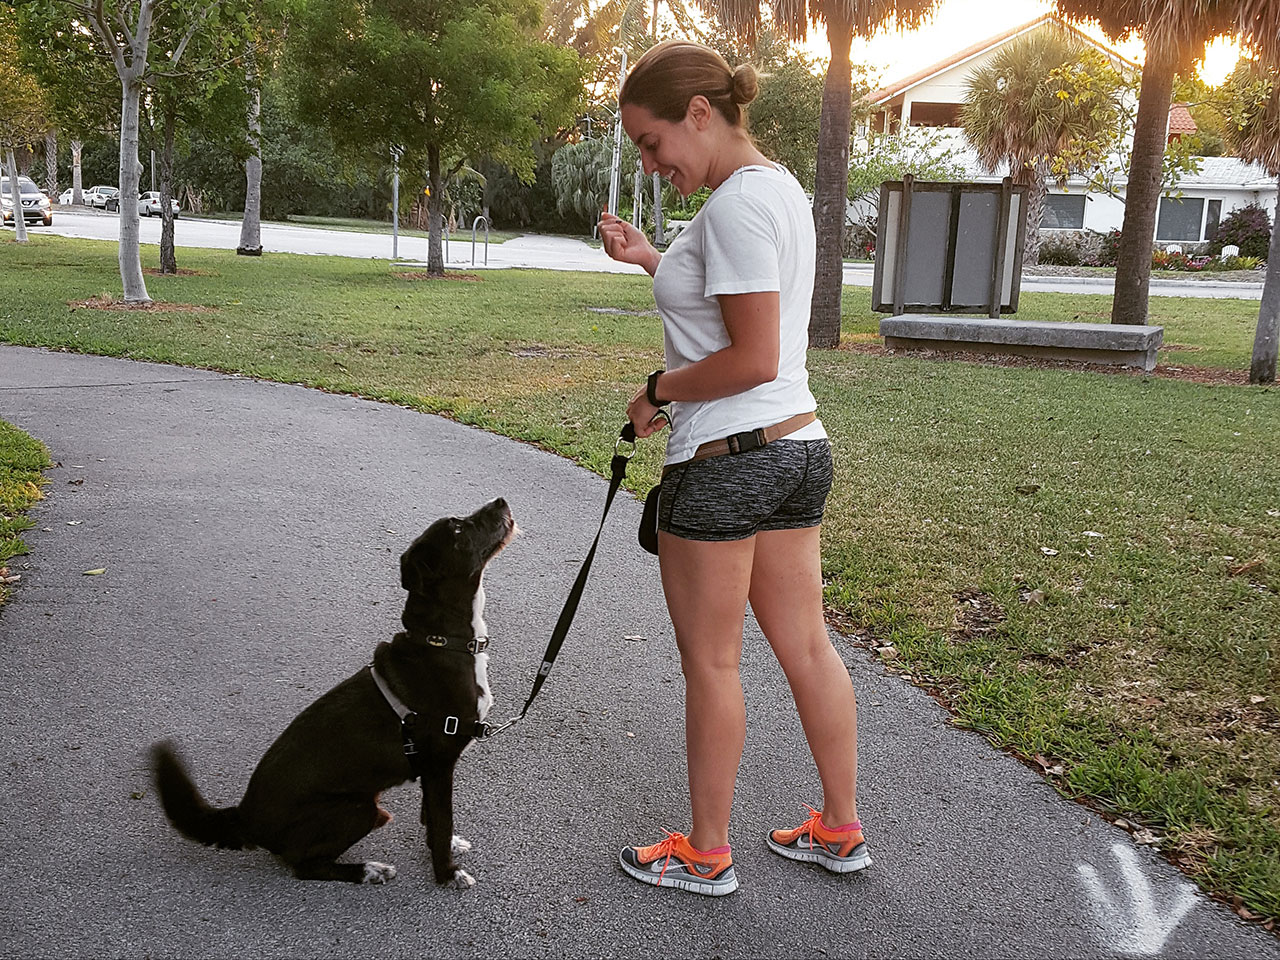 Become a dog walker the right way